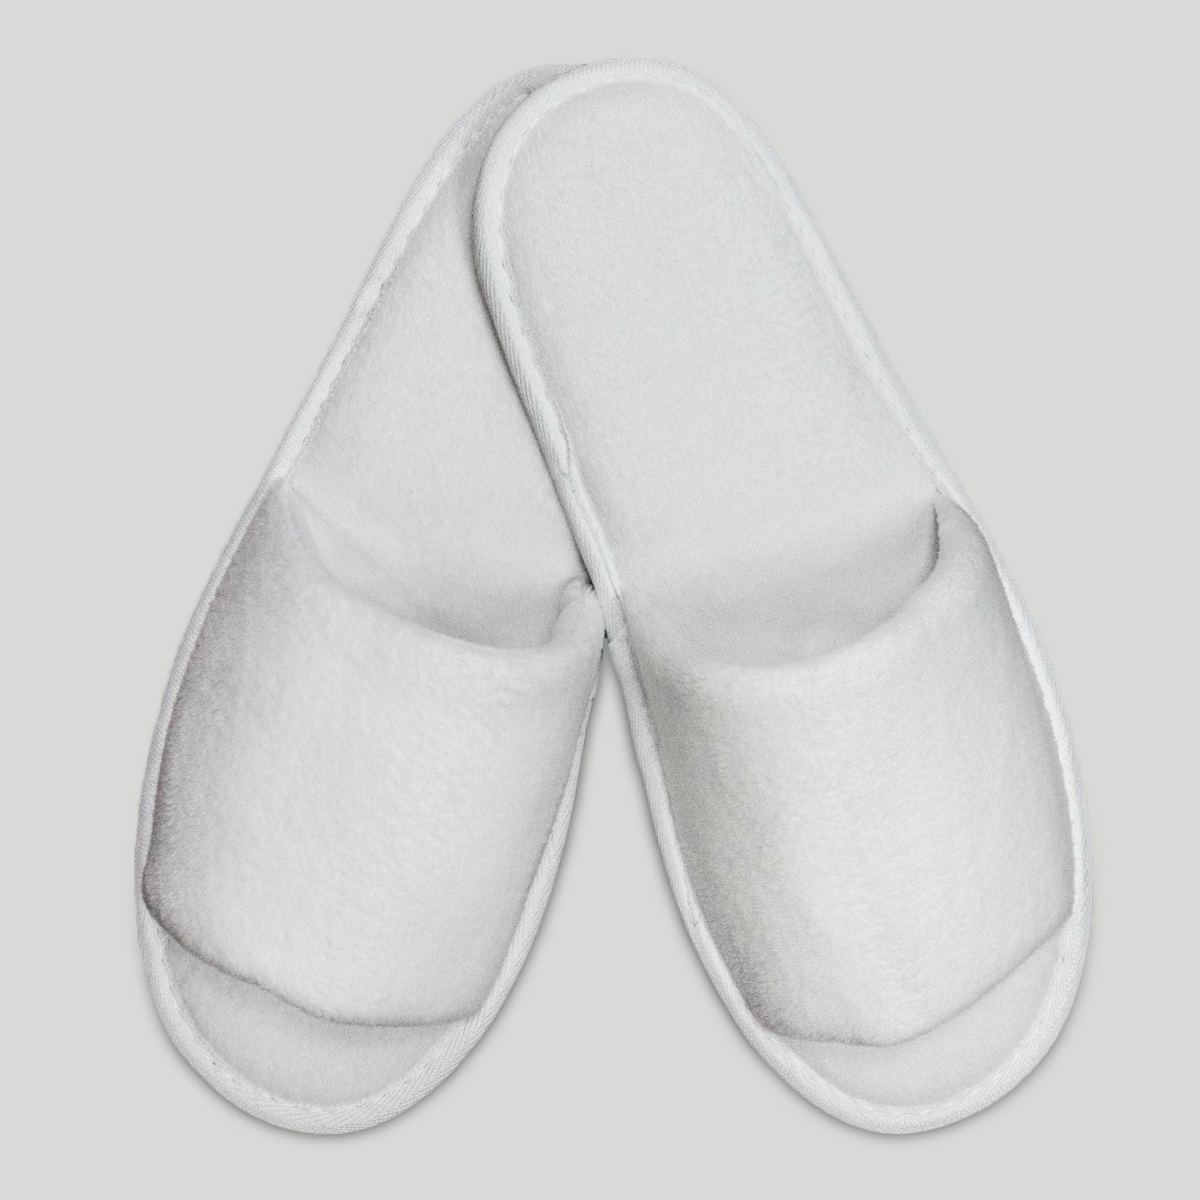 white open toe adult velour slippers | The Essentials Every Cryotherapy Spa Must Have | cryotherapy spa | cryotherapy benefits